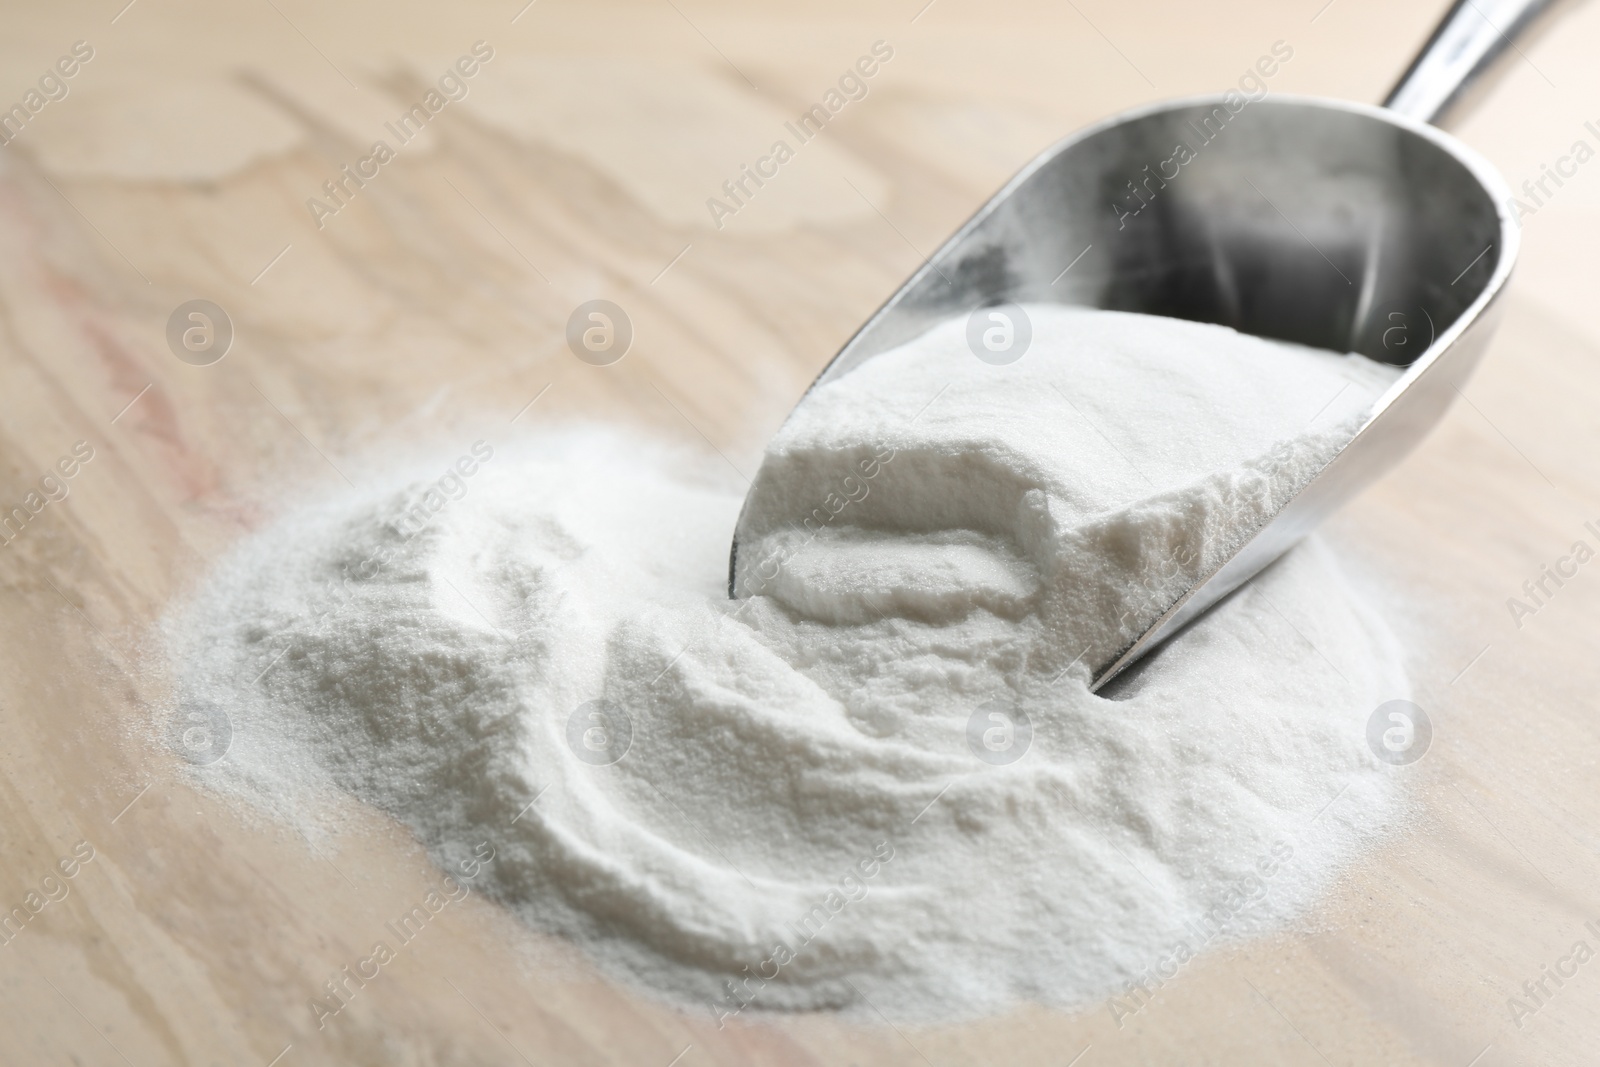 Photo of Baking soda in scoop on wooden table